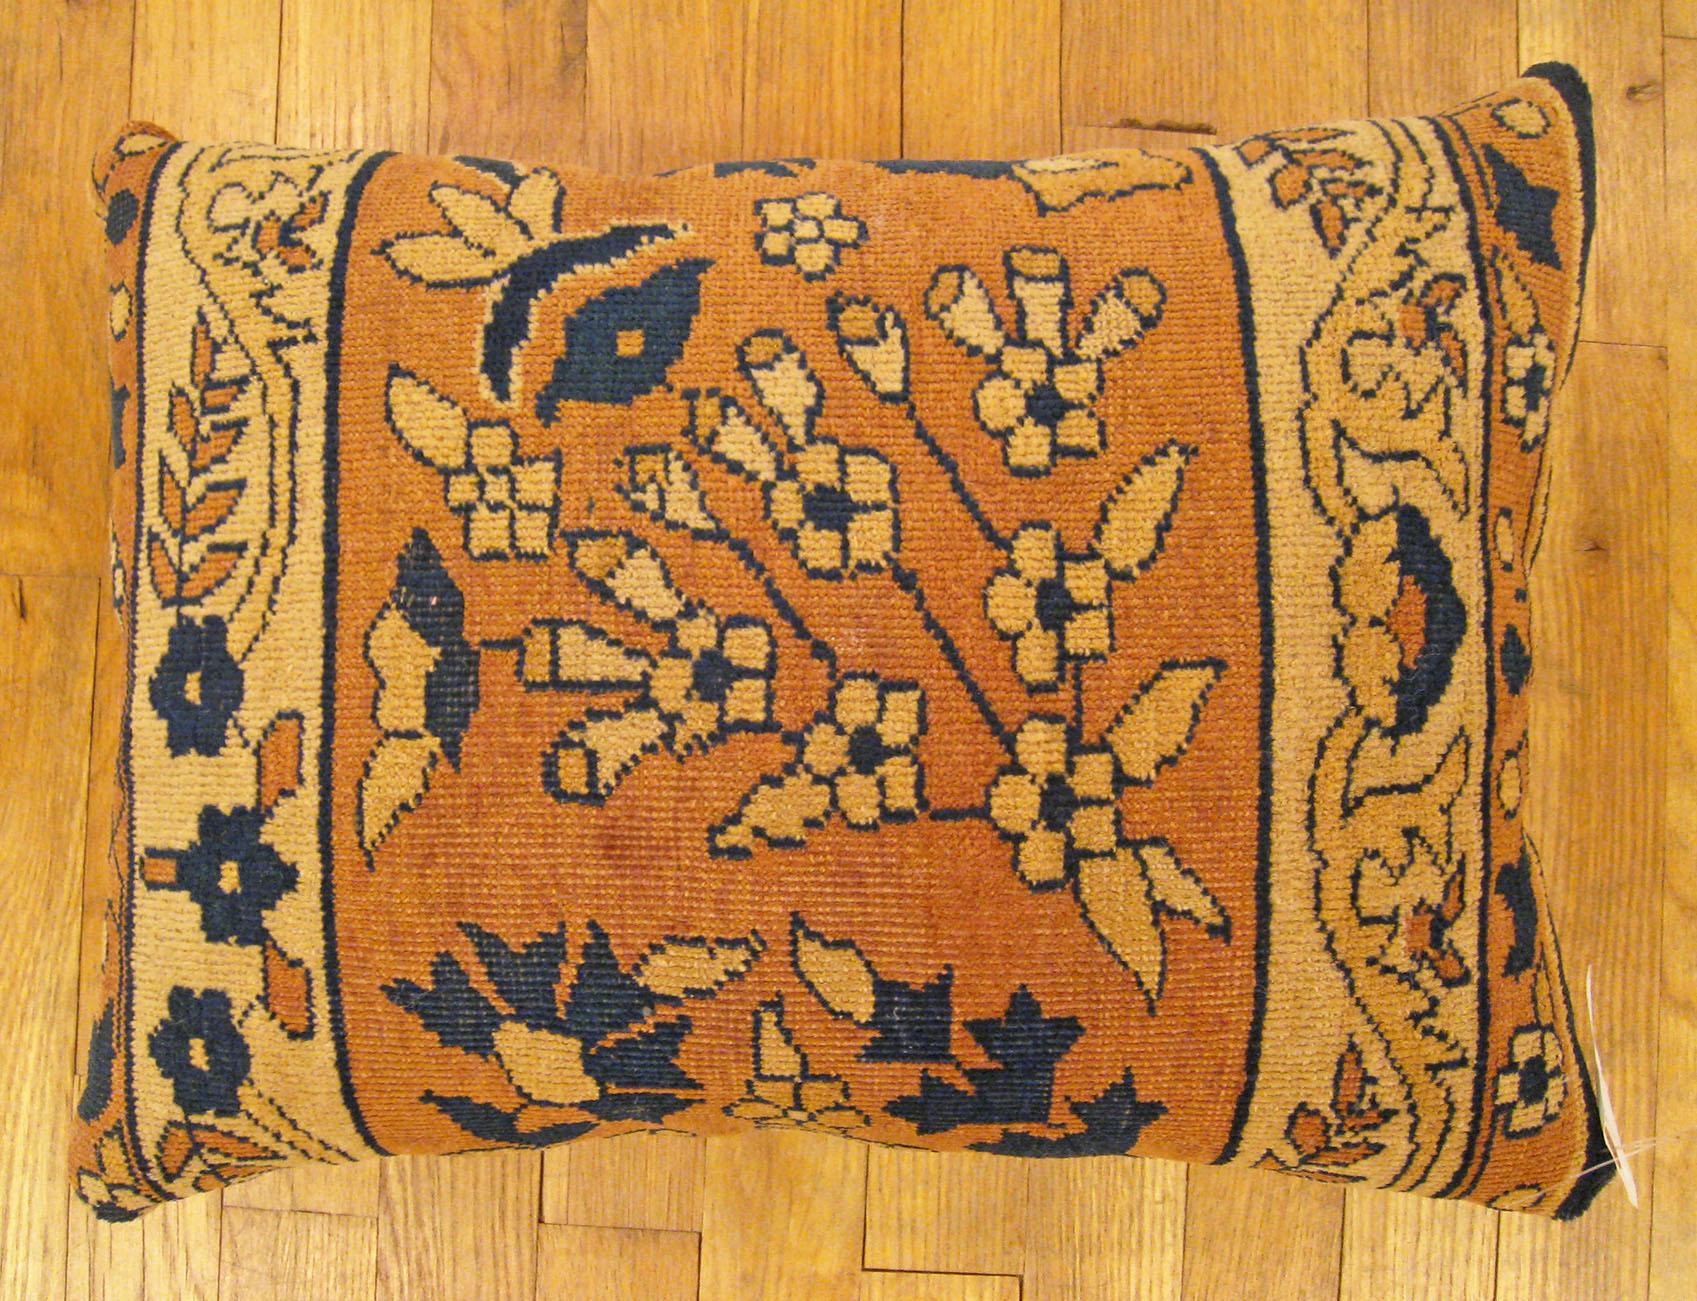 Antique Indian Agra rug pillow; size 20” x 15” (1’ 8” x 1’ 3”).

An antique decorative pillow with floral elements allover a salmon central field, size 20” x 15” (1’ 8” x 1’ 3”). This lovely decorative pillow features an antique fabric of a Agra